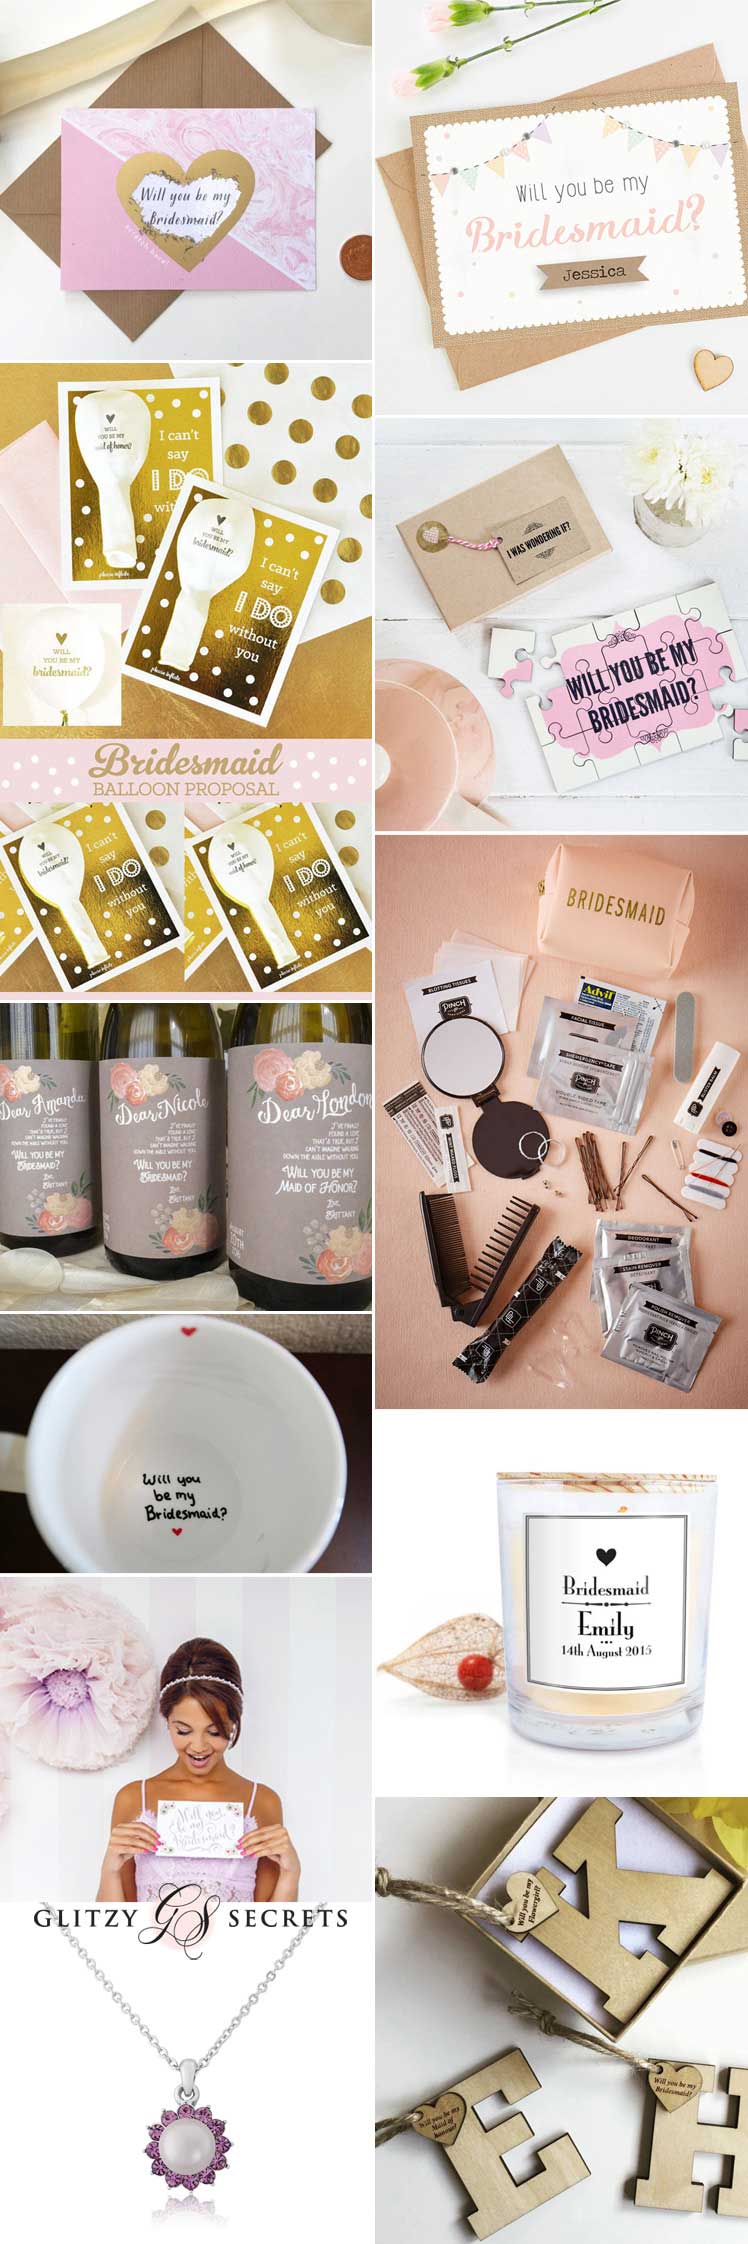 Will you be my bridesmaid ideas inspiration